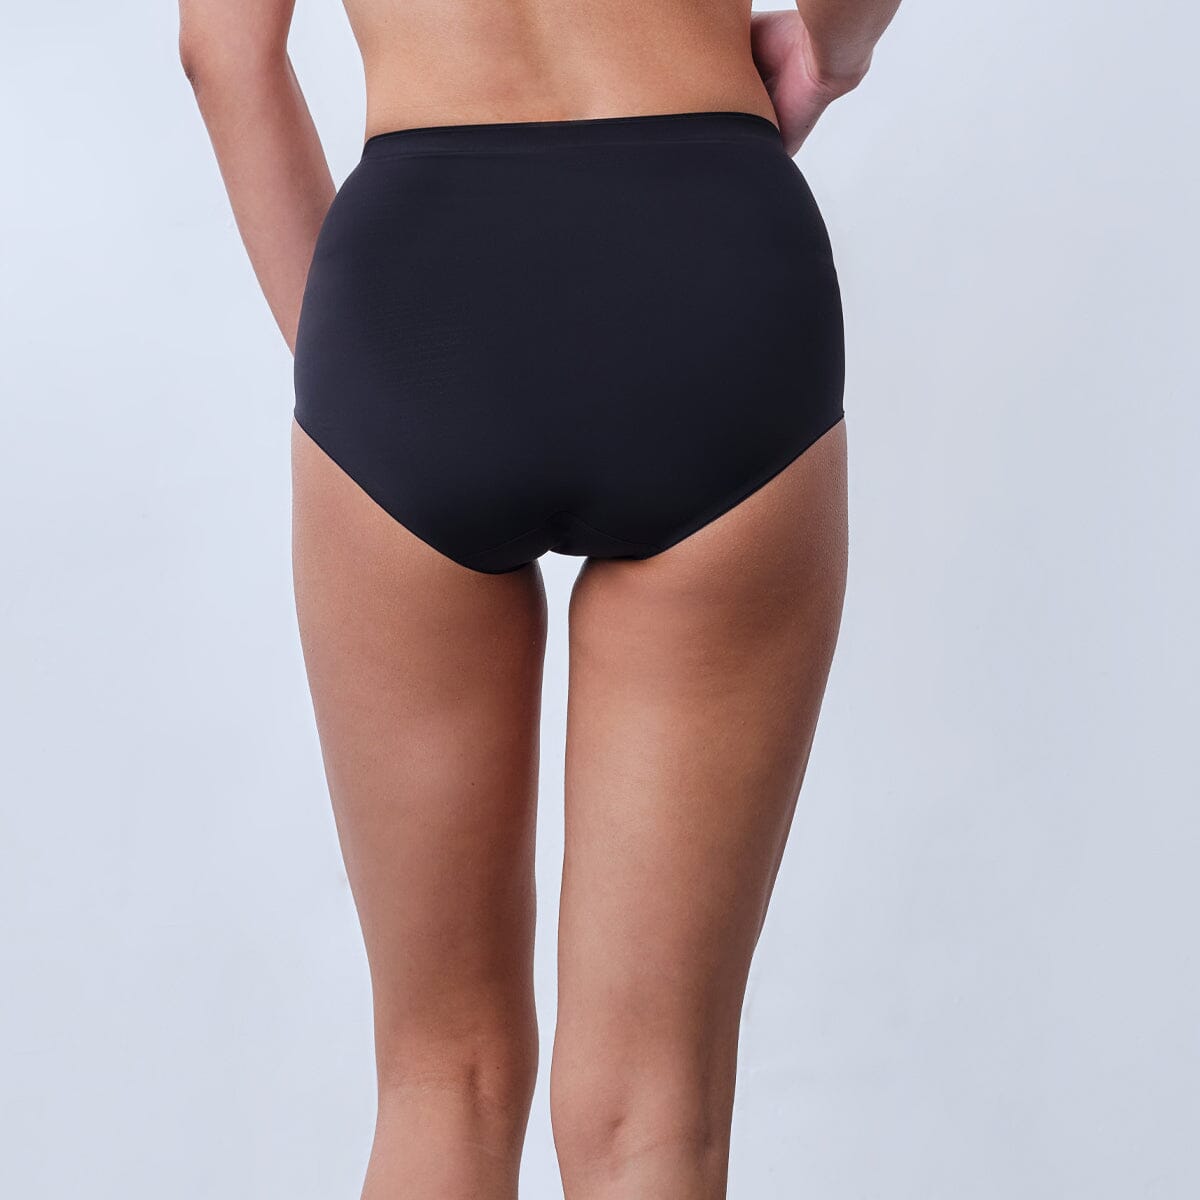 High Waist Light Control Brief Panty Panty Her own words 